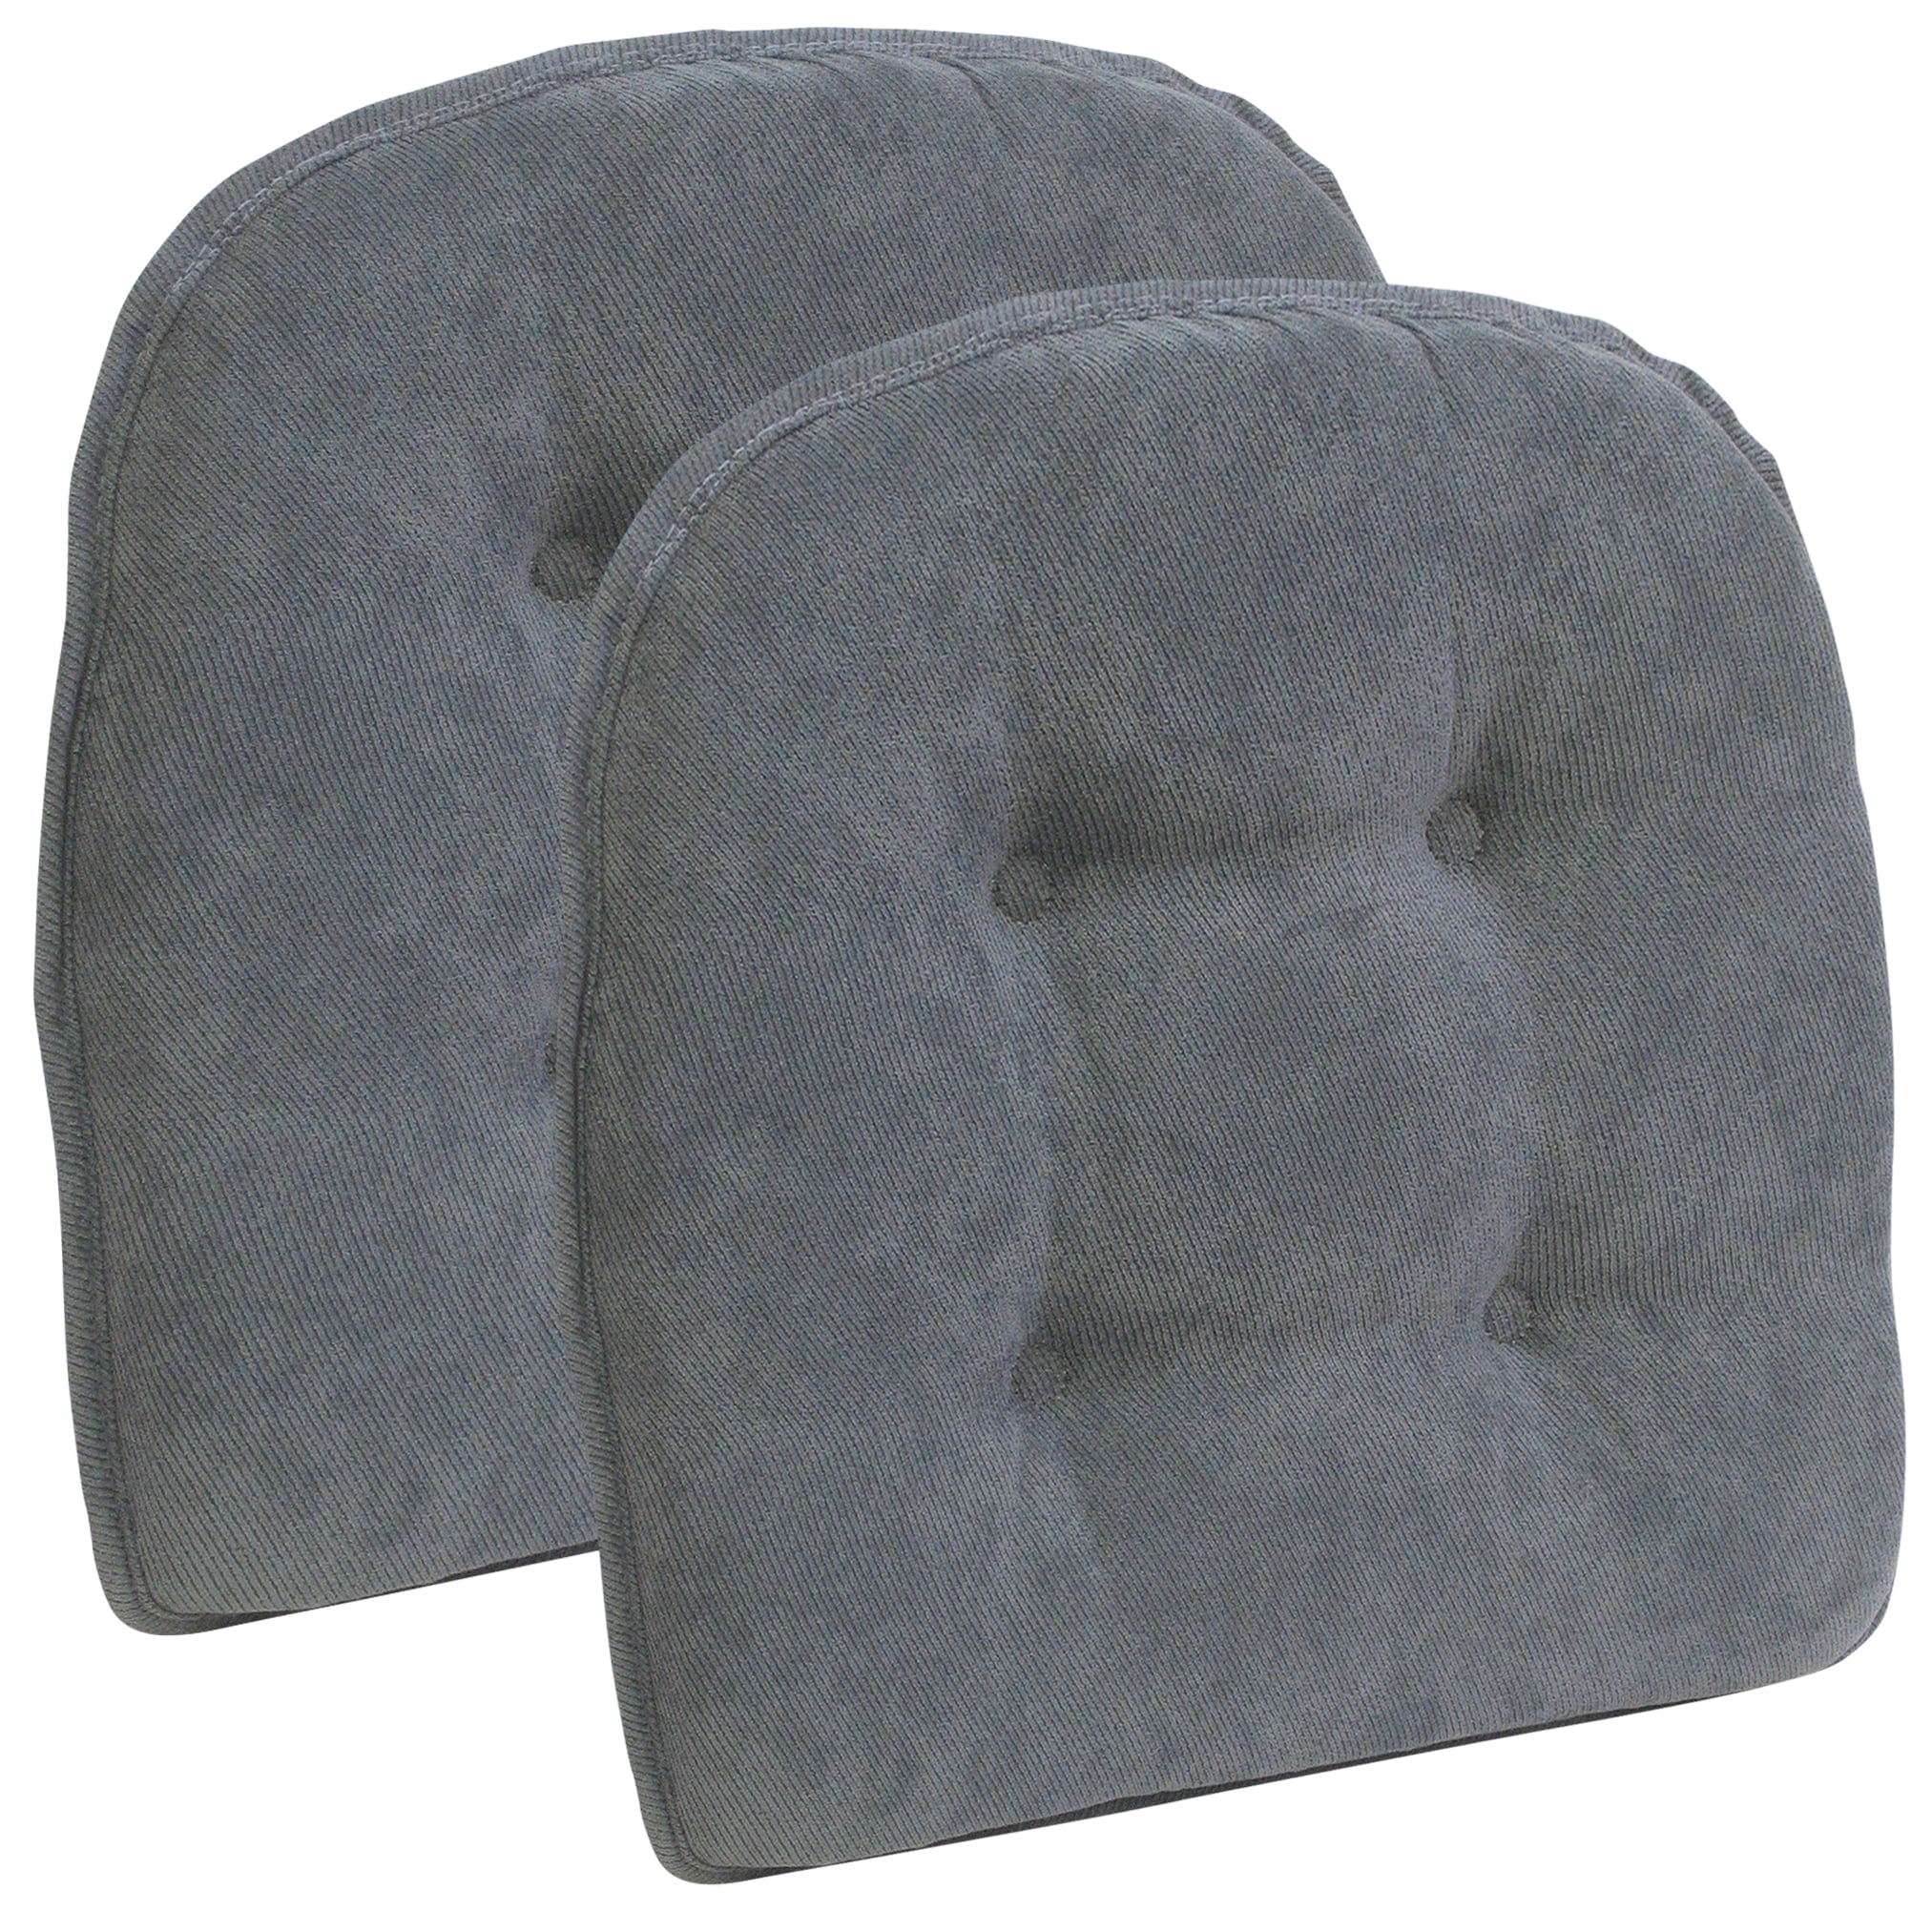 15 in. x 16 in. Gripper Non-Slip Twillo Thyme Tufted Chair